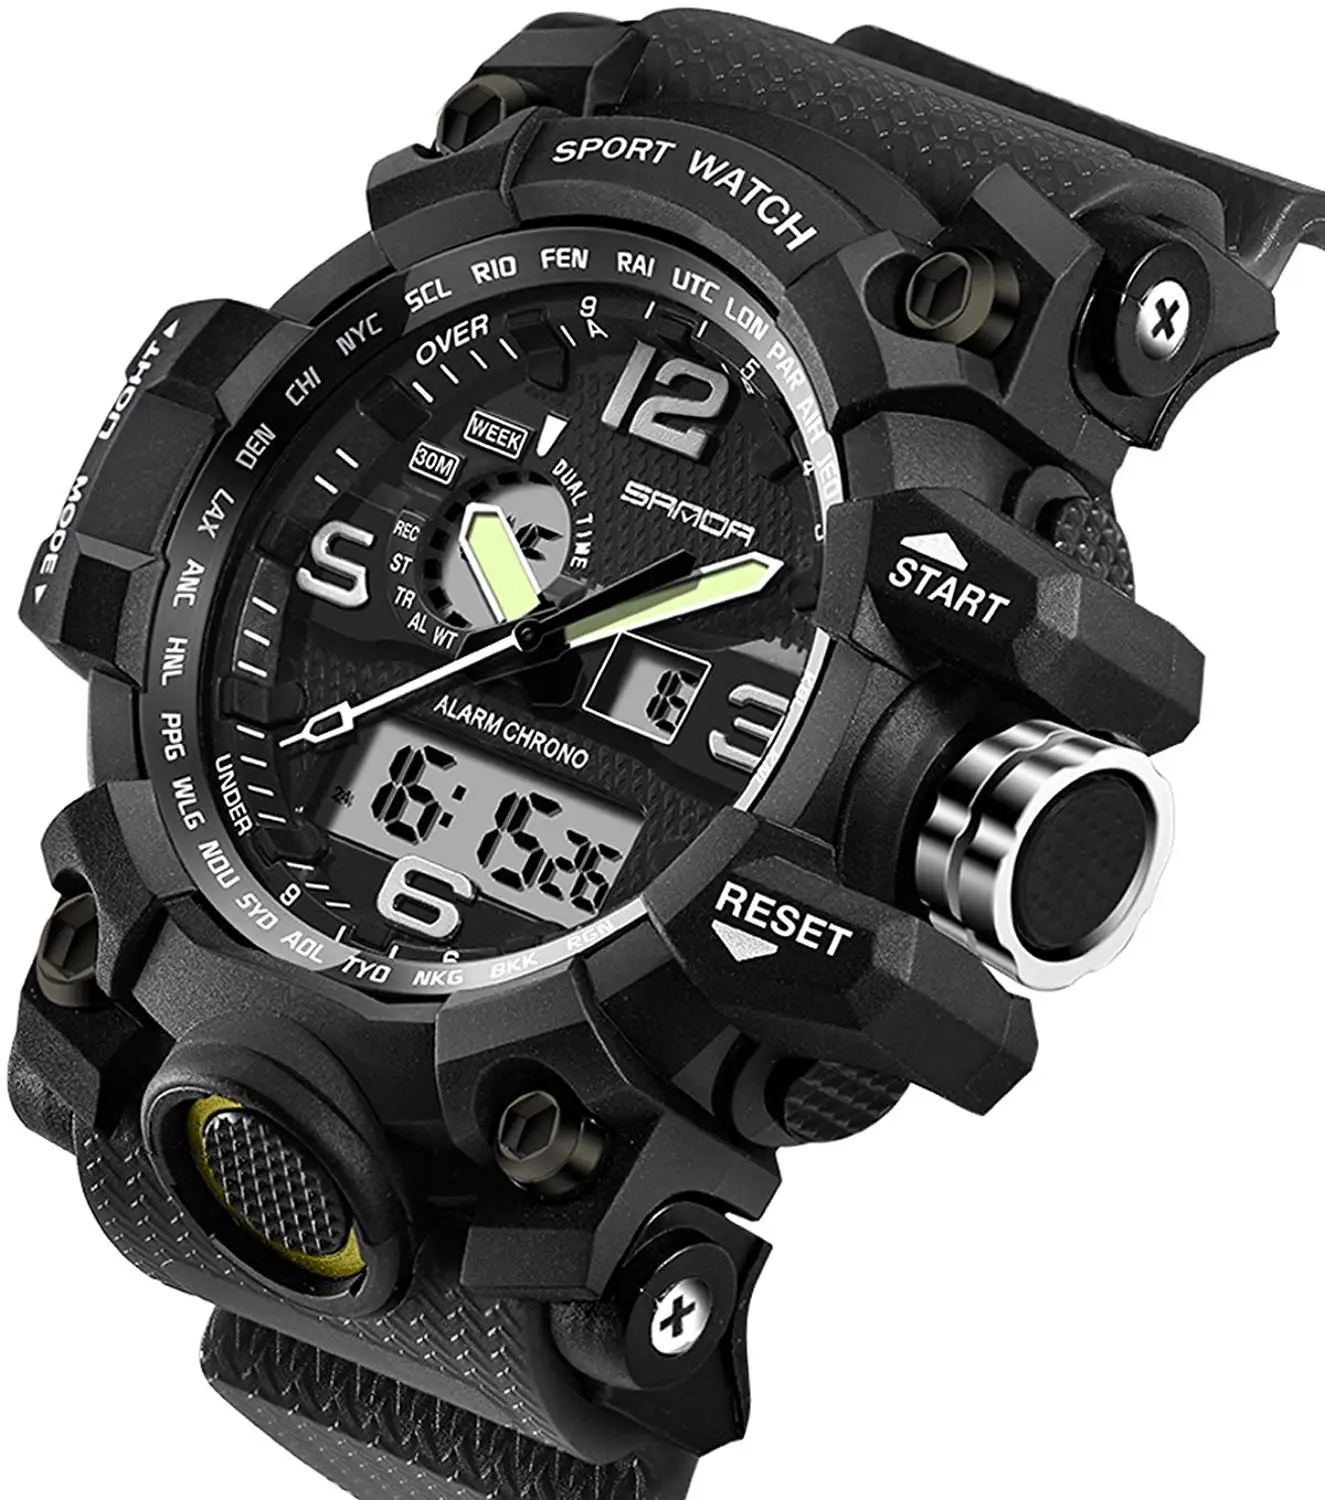 military time digital watch